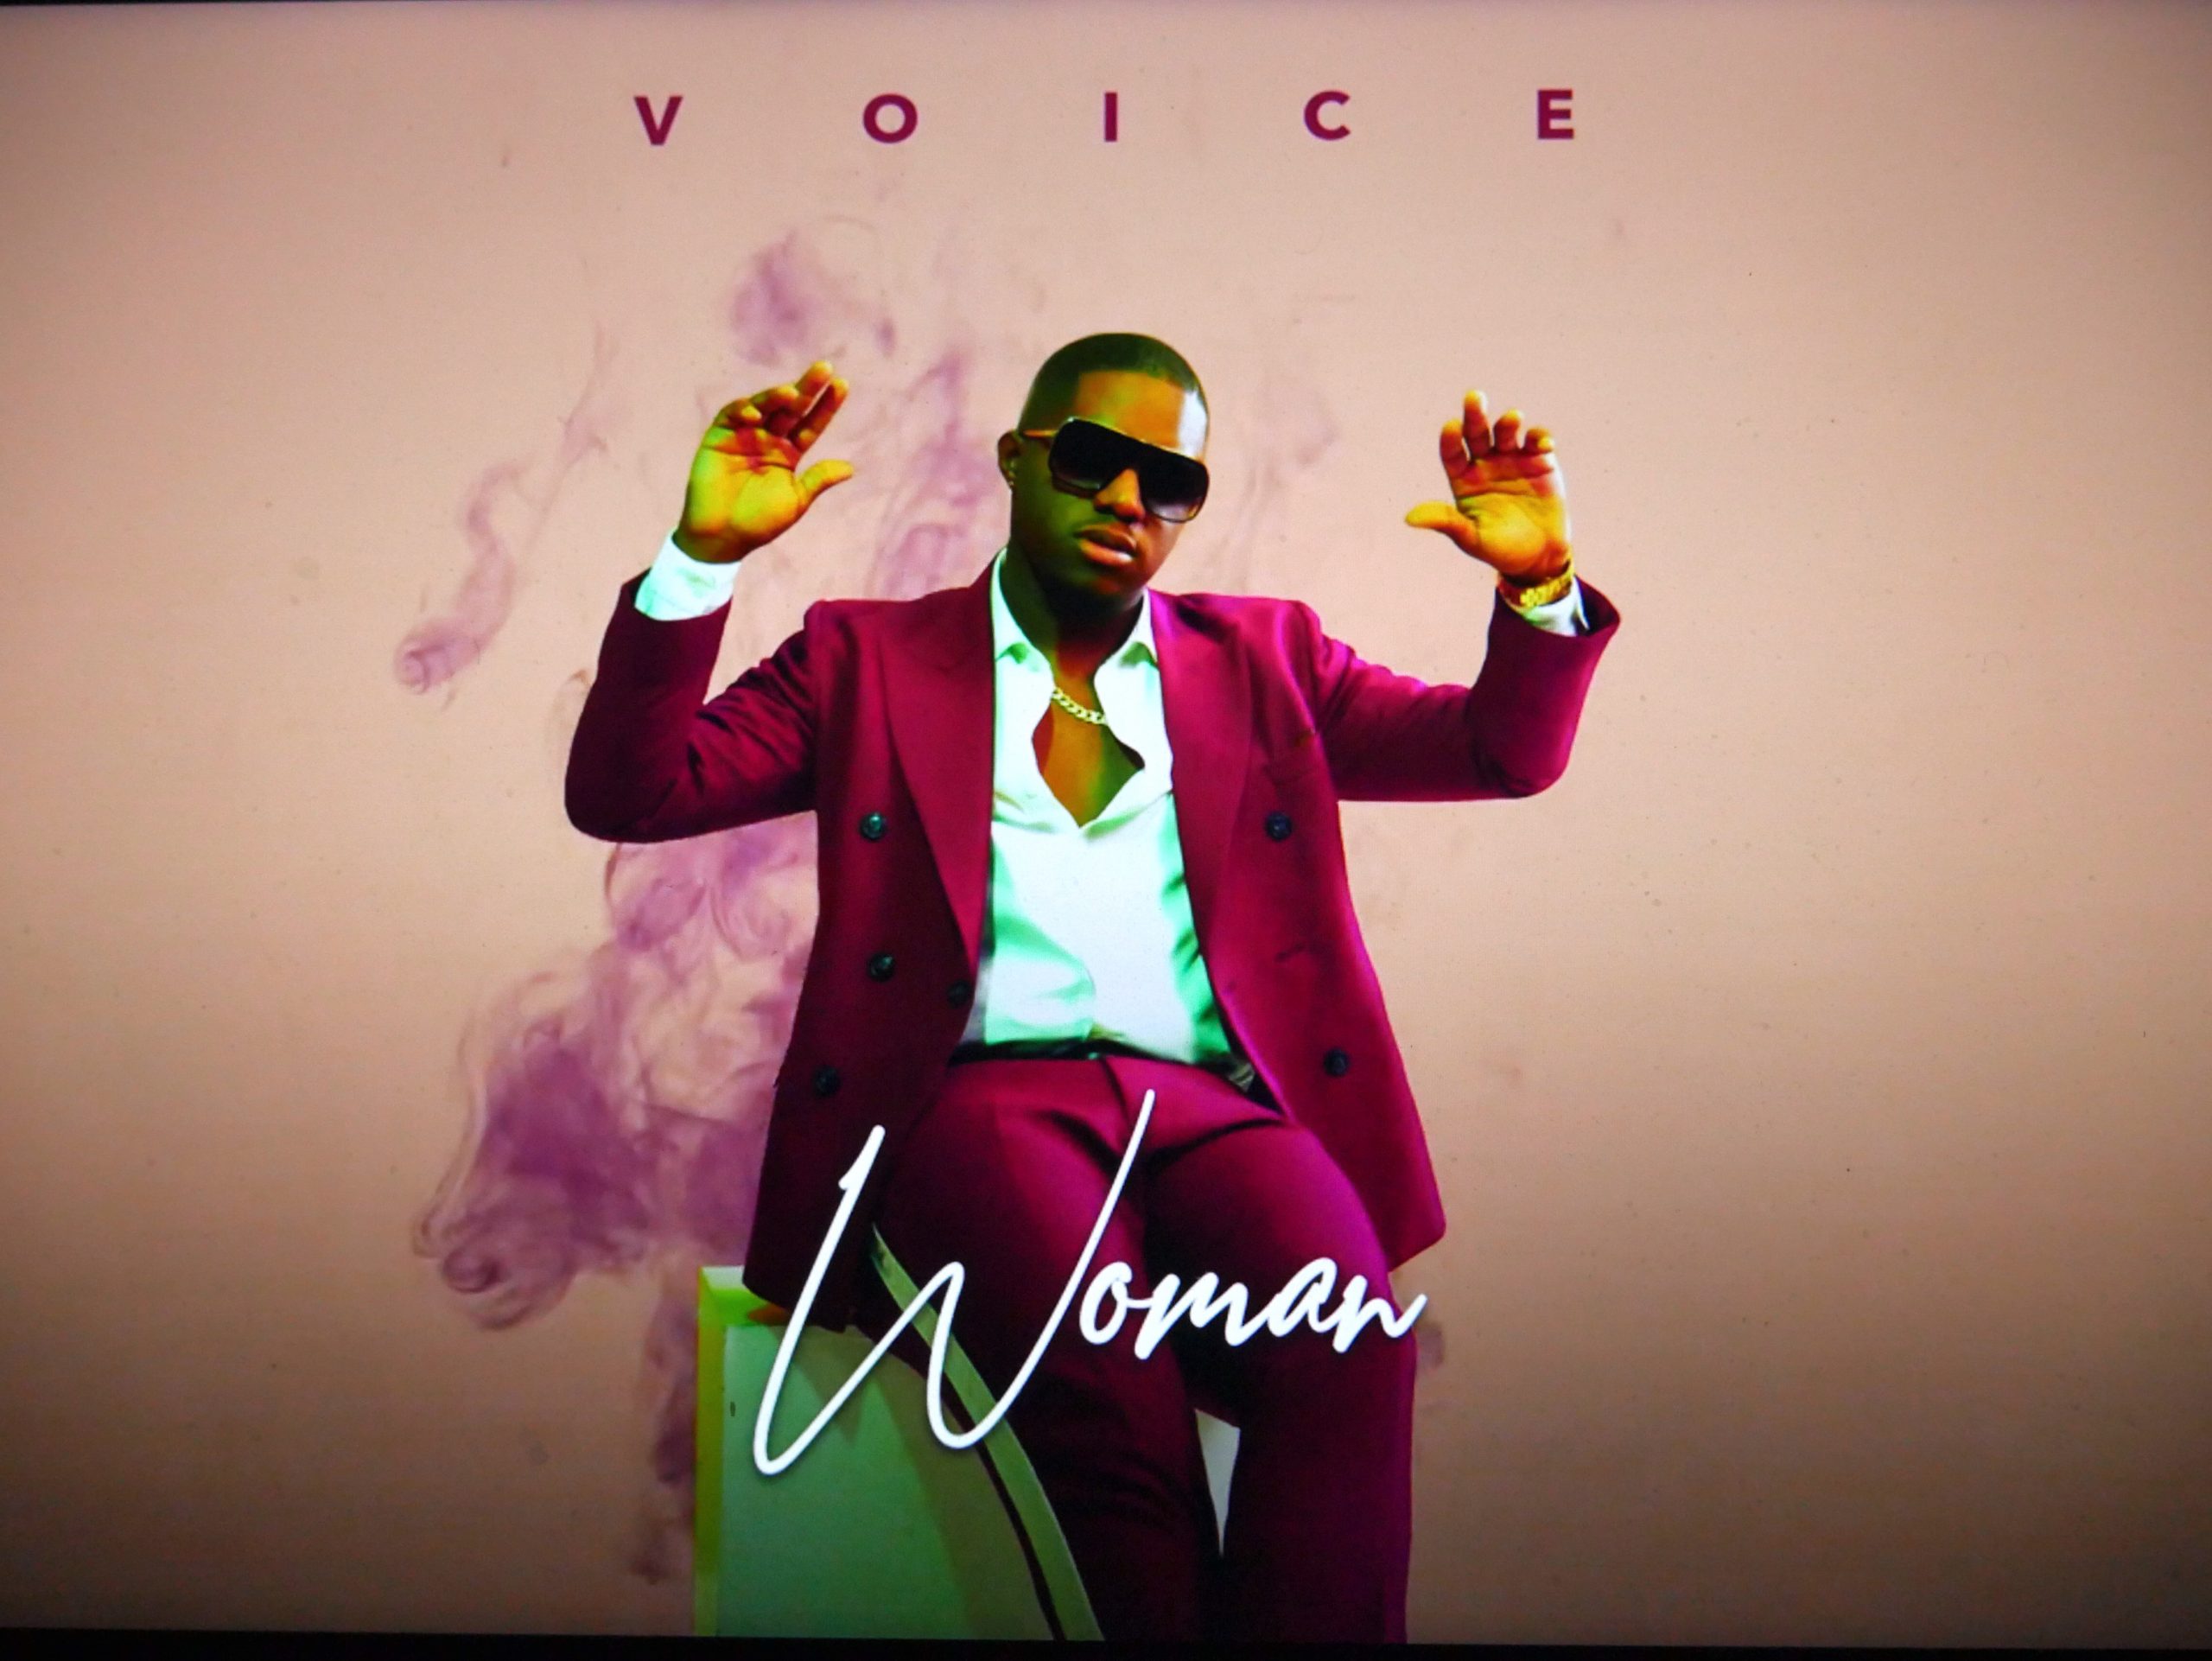 LISTEN: ‘Voice’ Returns With New Single, ‘WOMAN’